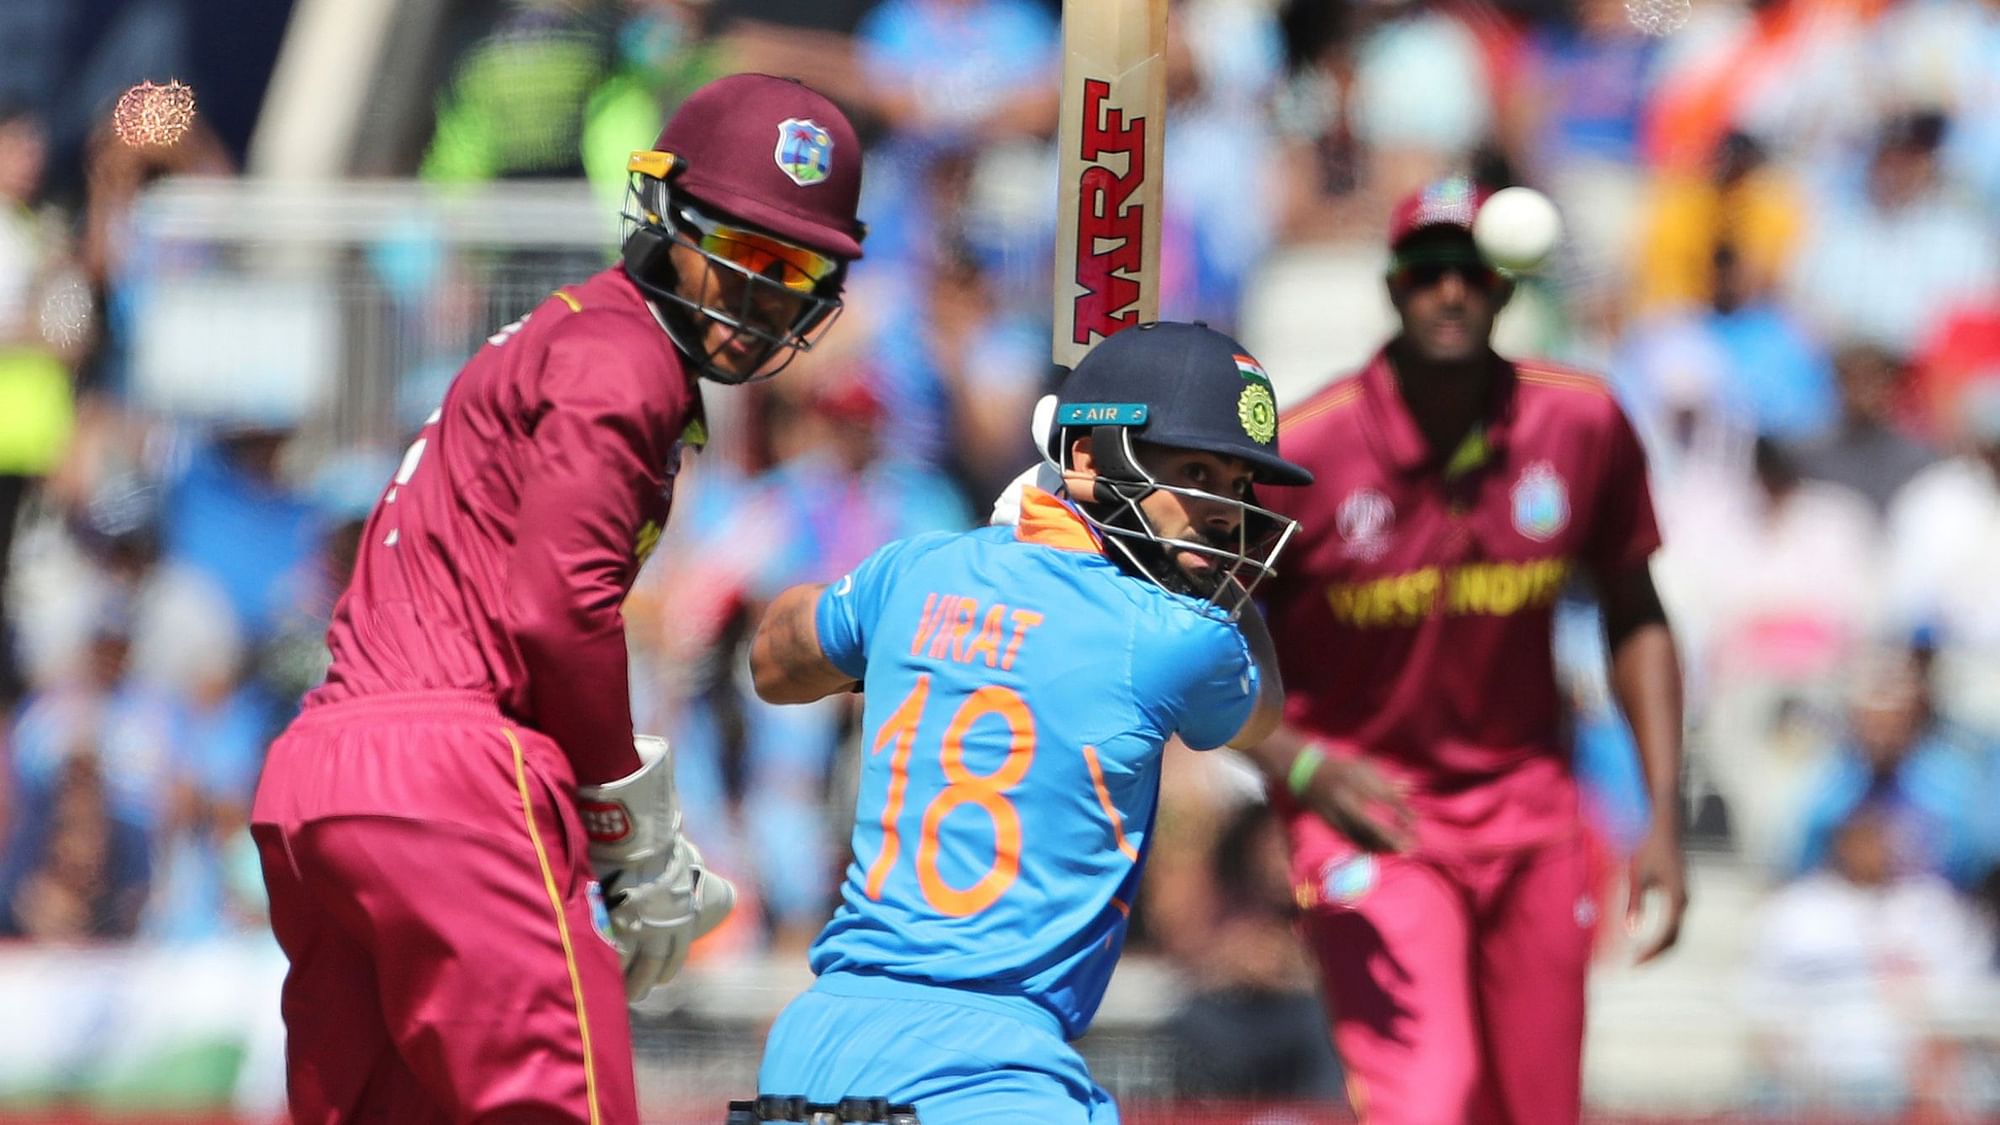 India skipper Virat Kohli became the fastest batsman to score 20,000 international runs during the ICC World Cup tie against West Indies.